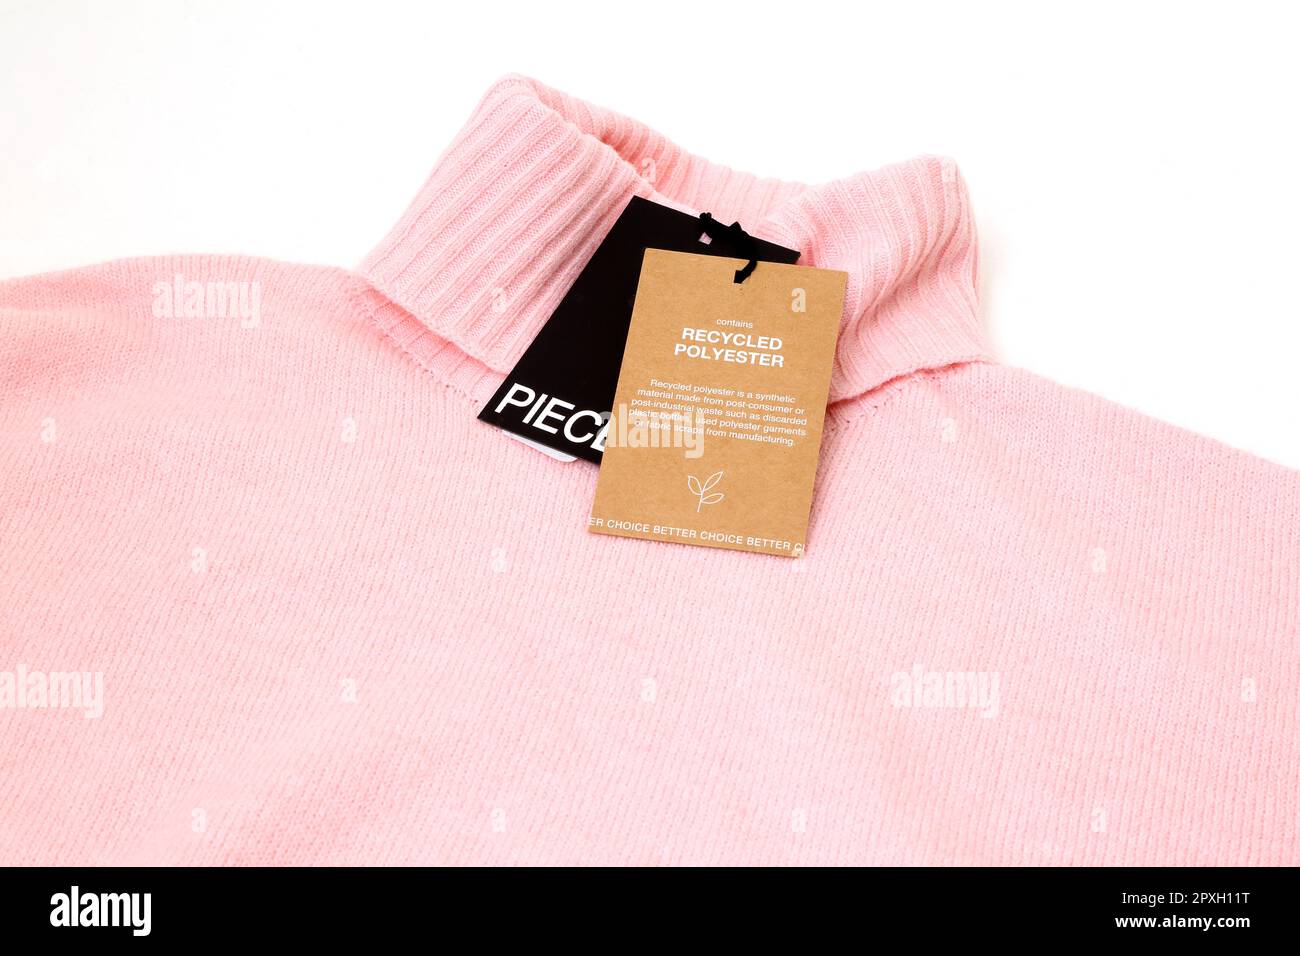 Recycled Polyester Pink Turtle Neck Jumper with Labels Stock Photo